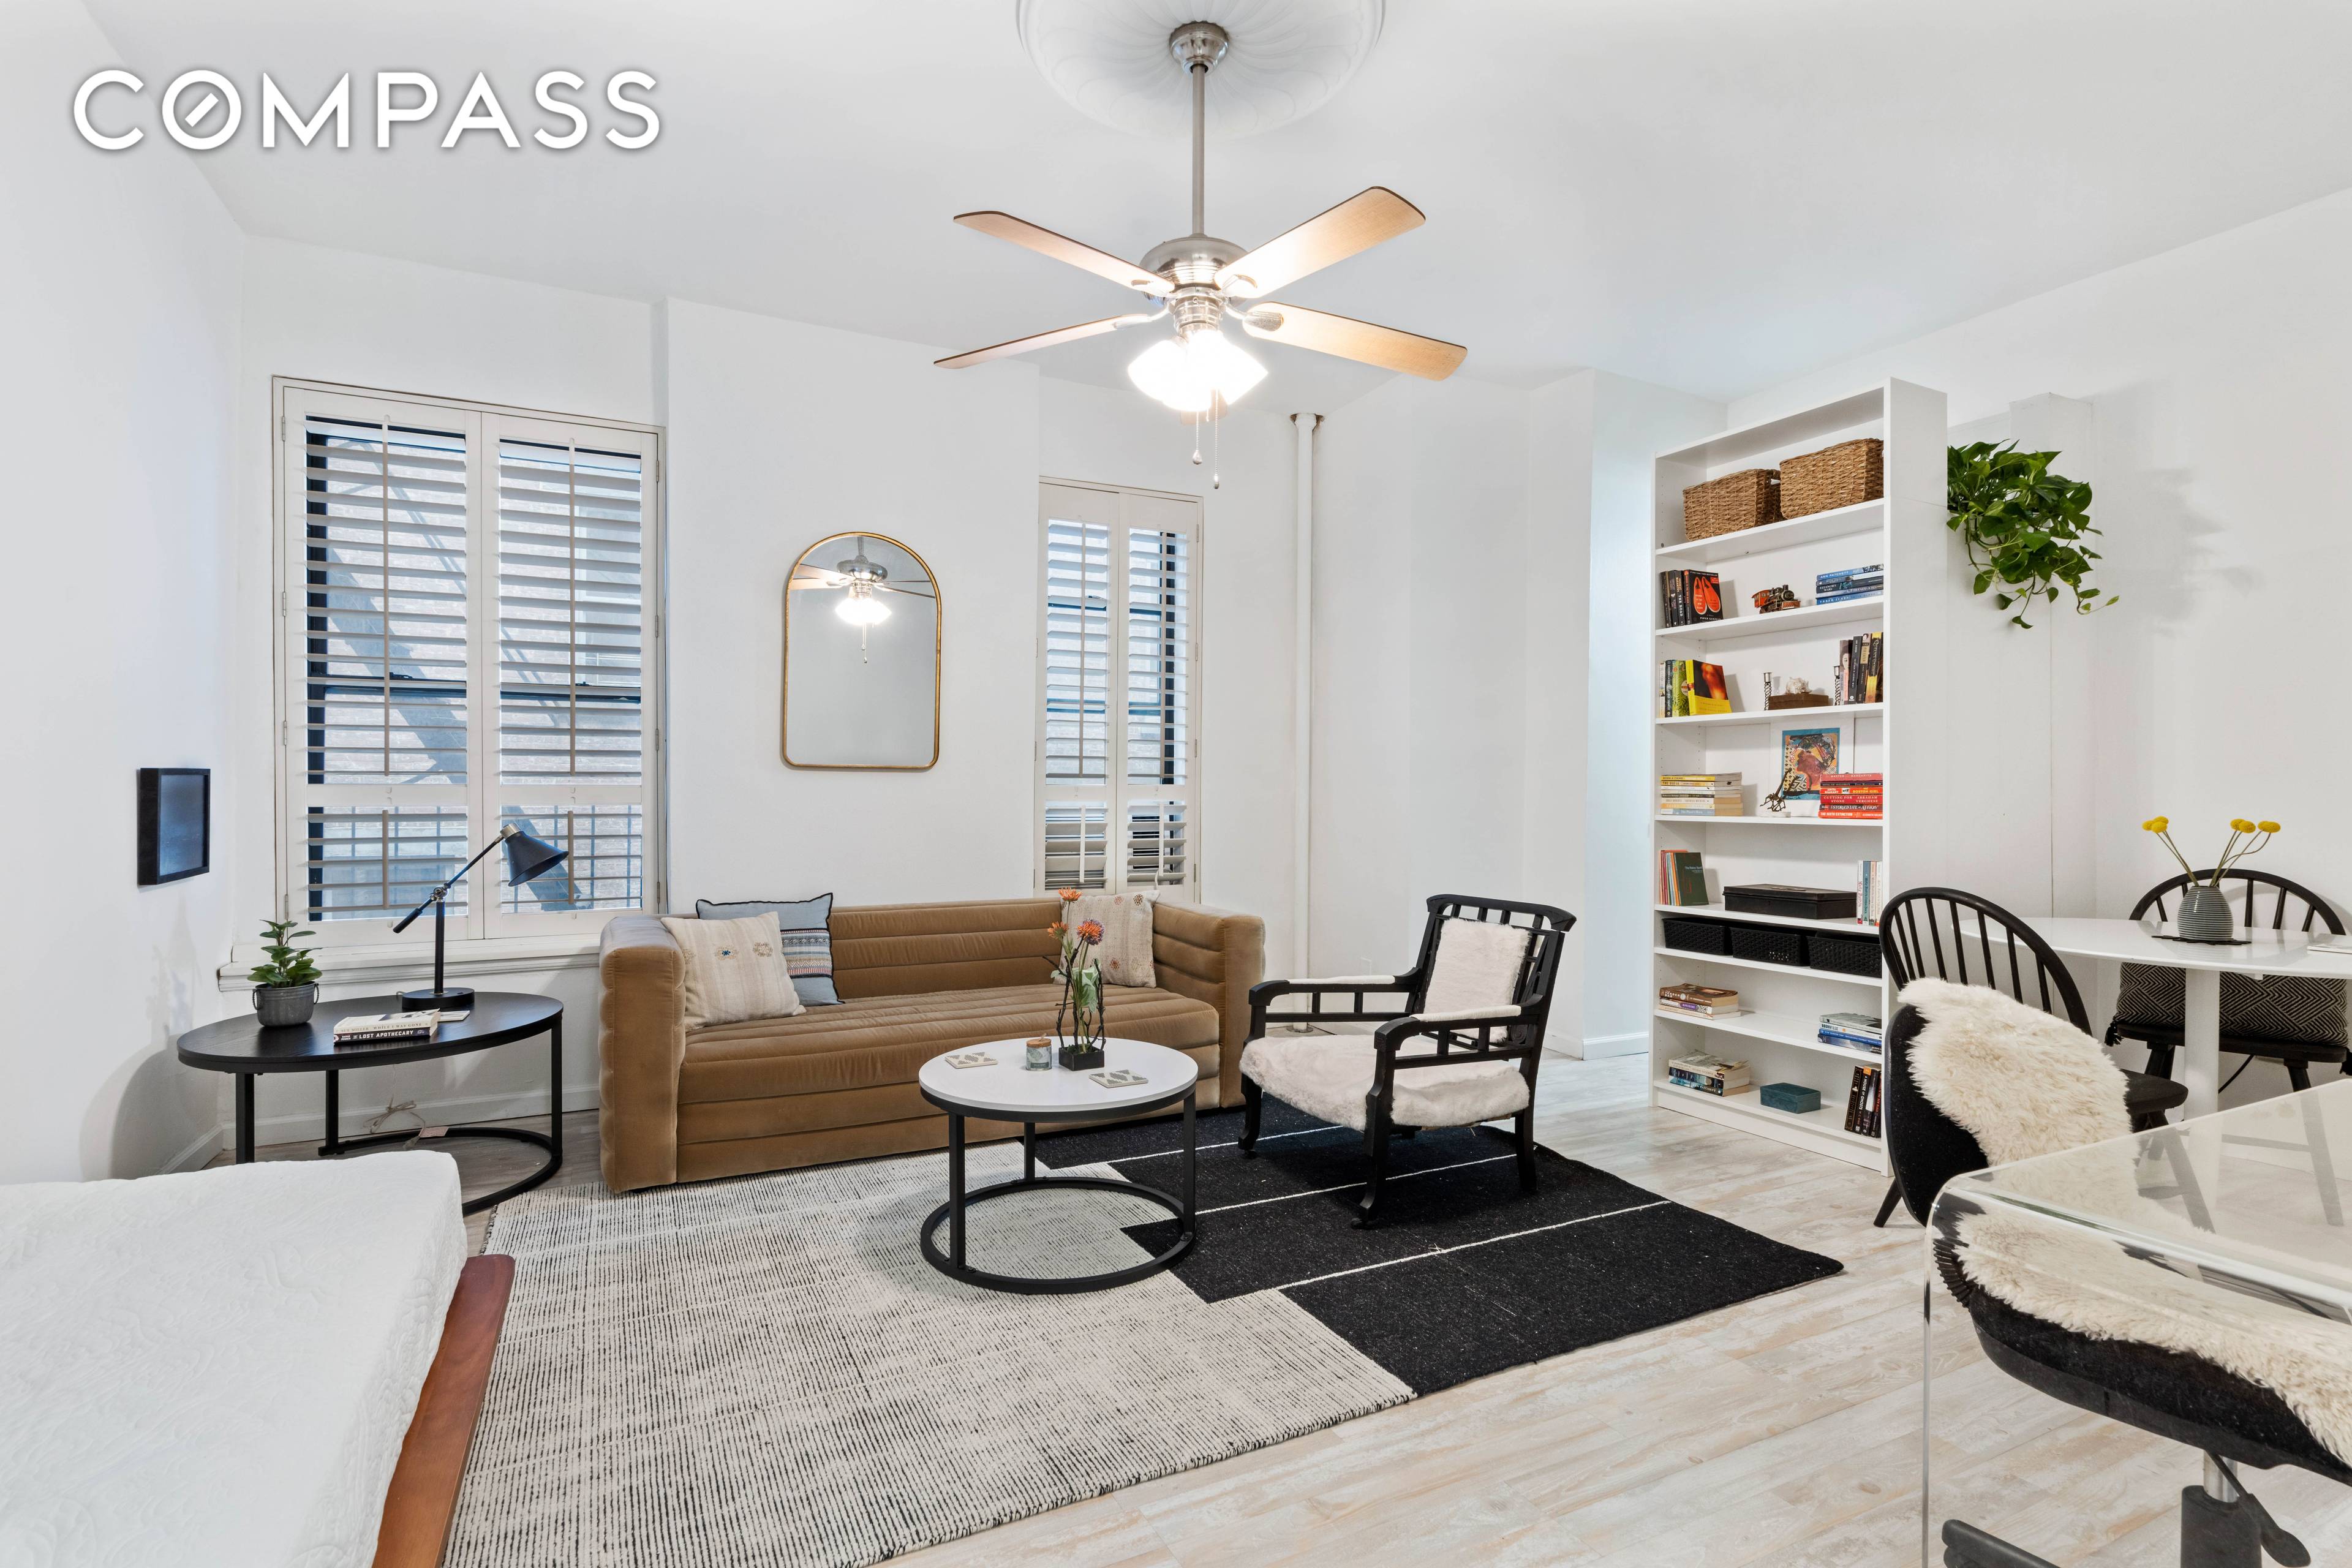 FULLY FURNISHED KINDLY EMAIL OR CALL FOR A SHOWING NO TEXTS PLEASE Welcome to 102 West 80th Street Apartment 55 This beautiful spacious Loft like studio Apartment features a generous ...